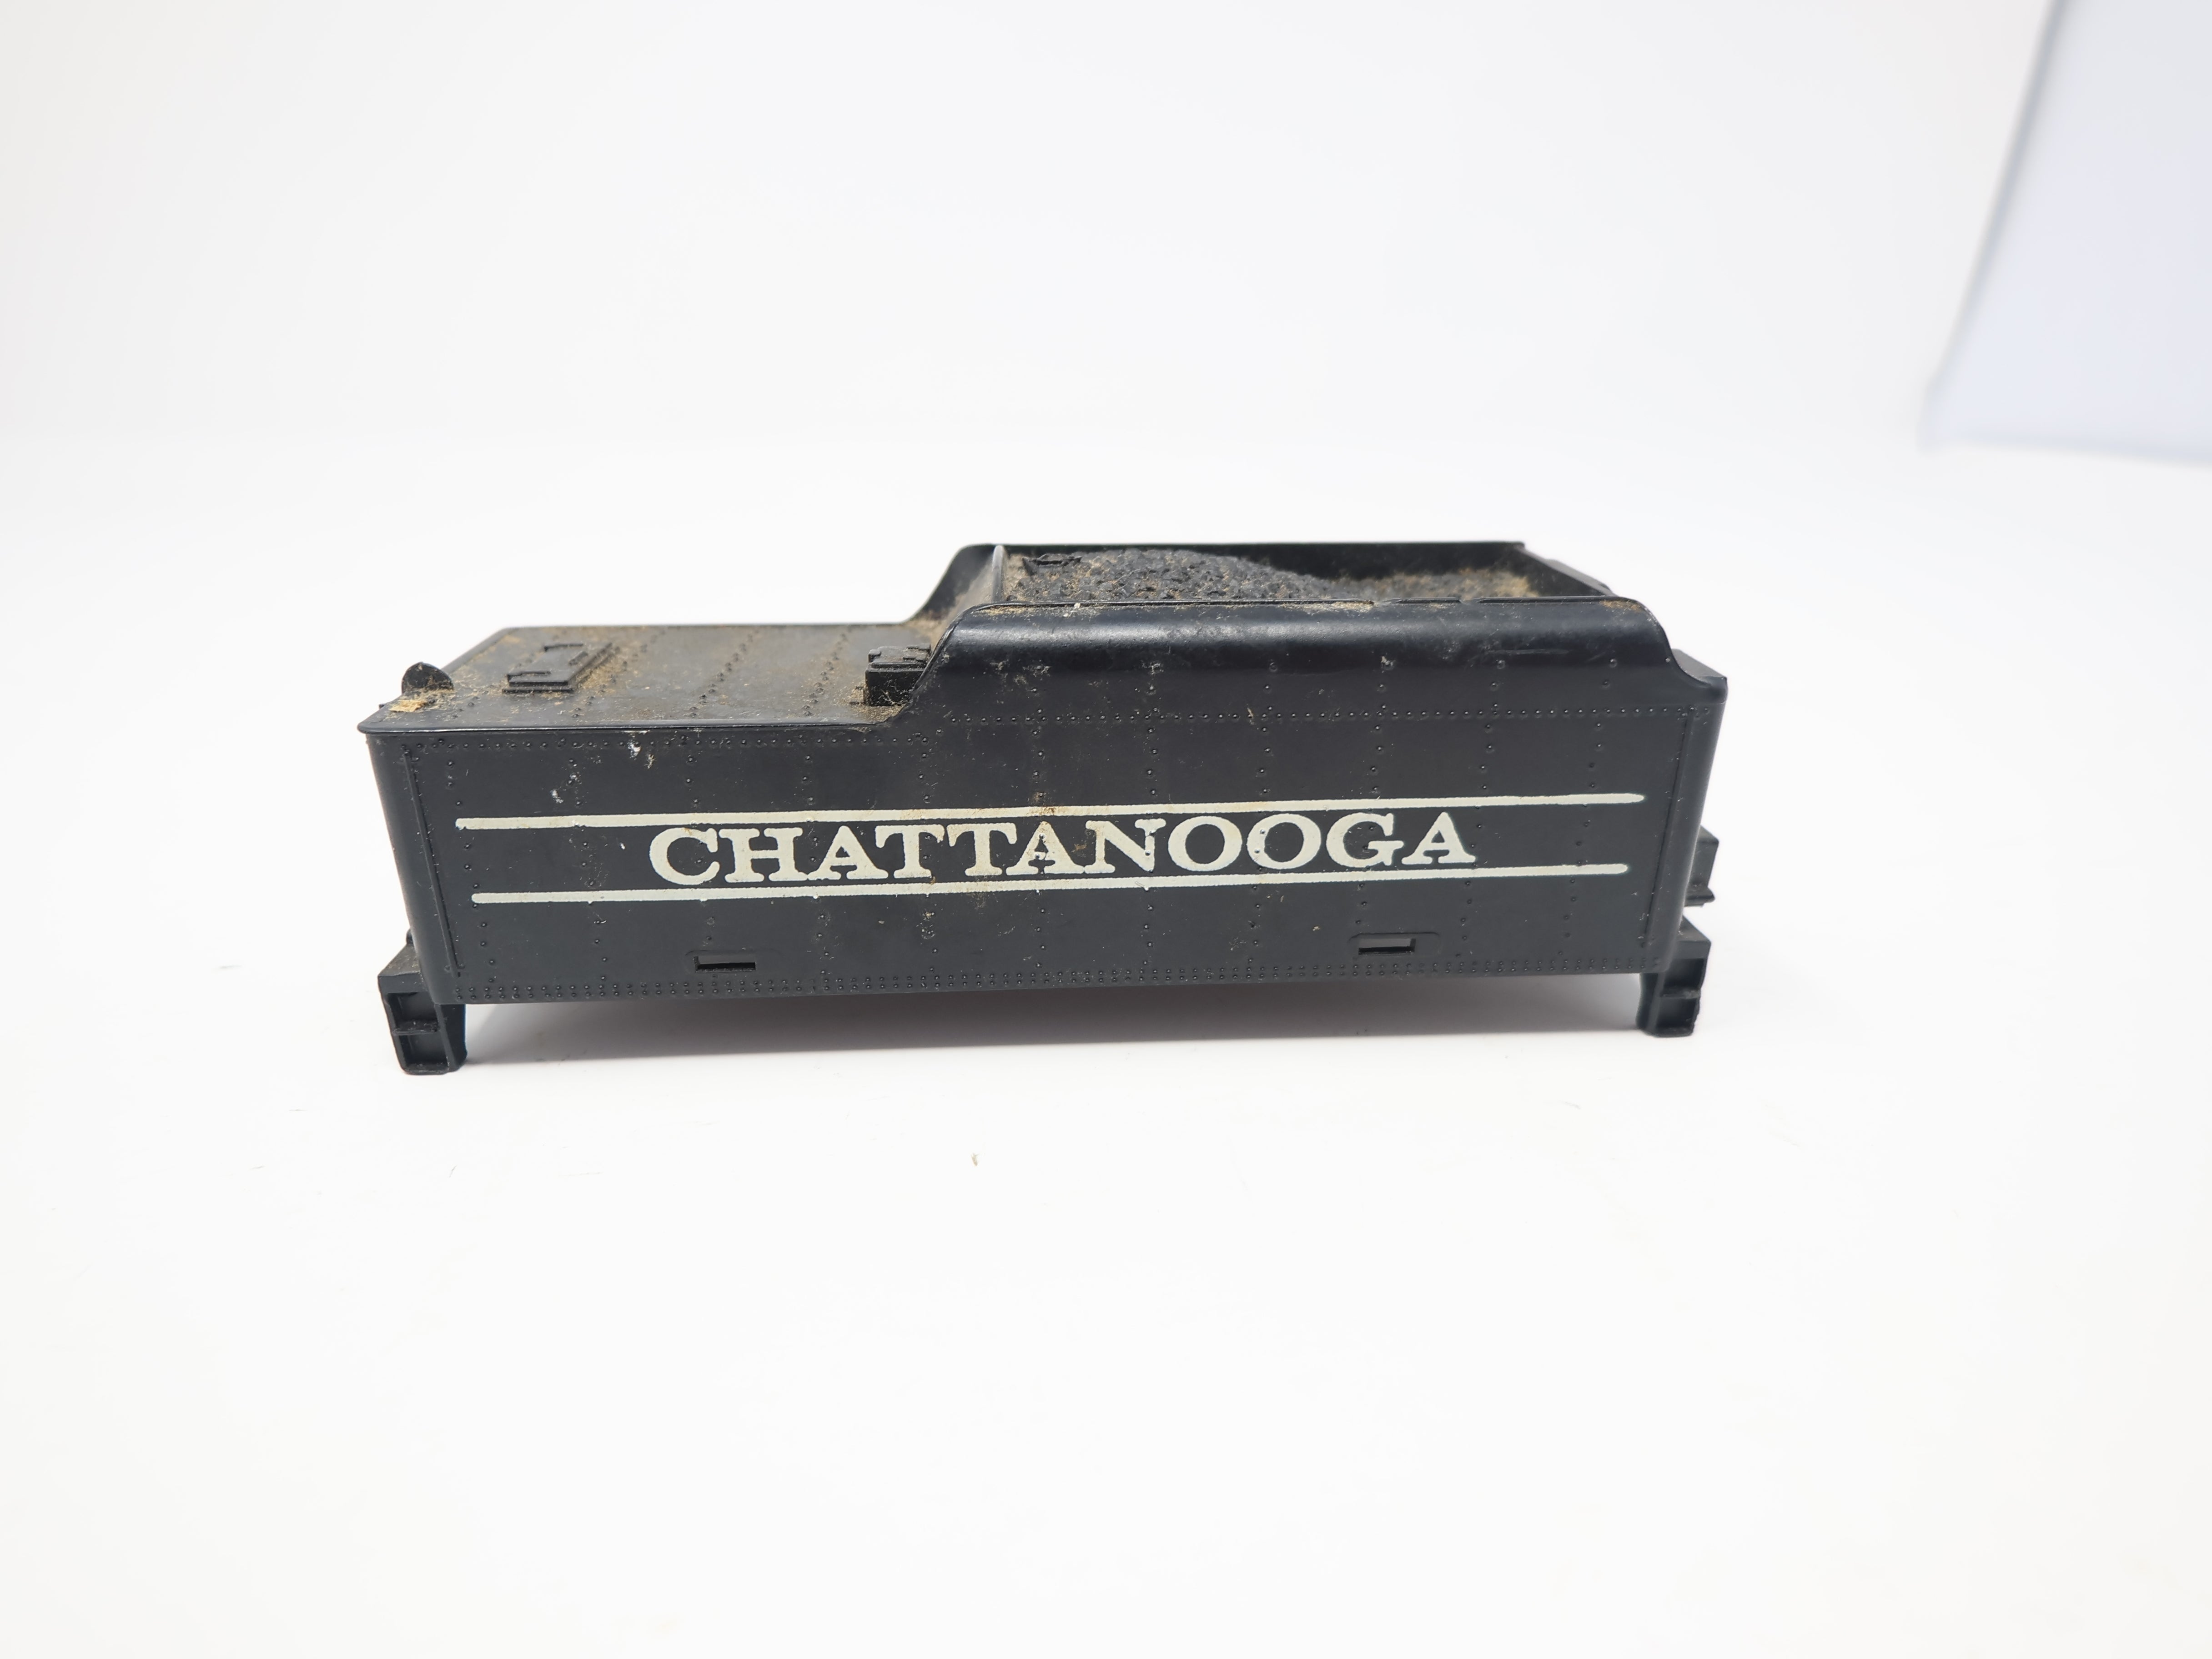 USED Tyco HO Scale, Tender Shell for 638 Steam Locomotive, Chattanooga Railroad